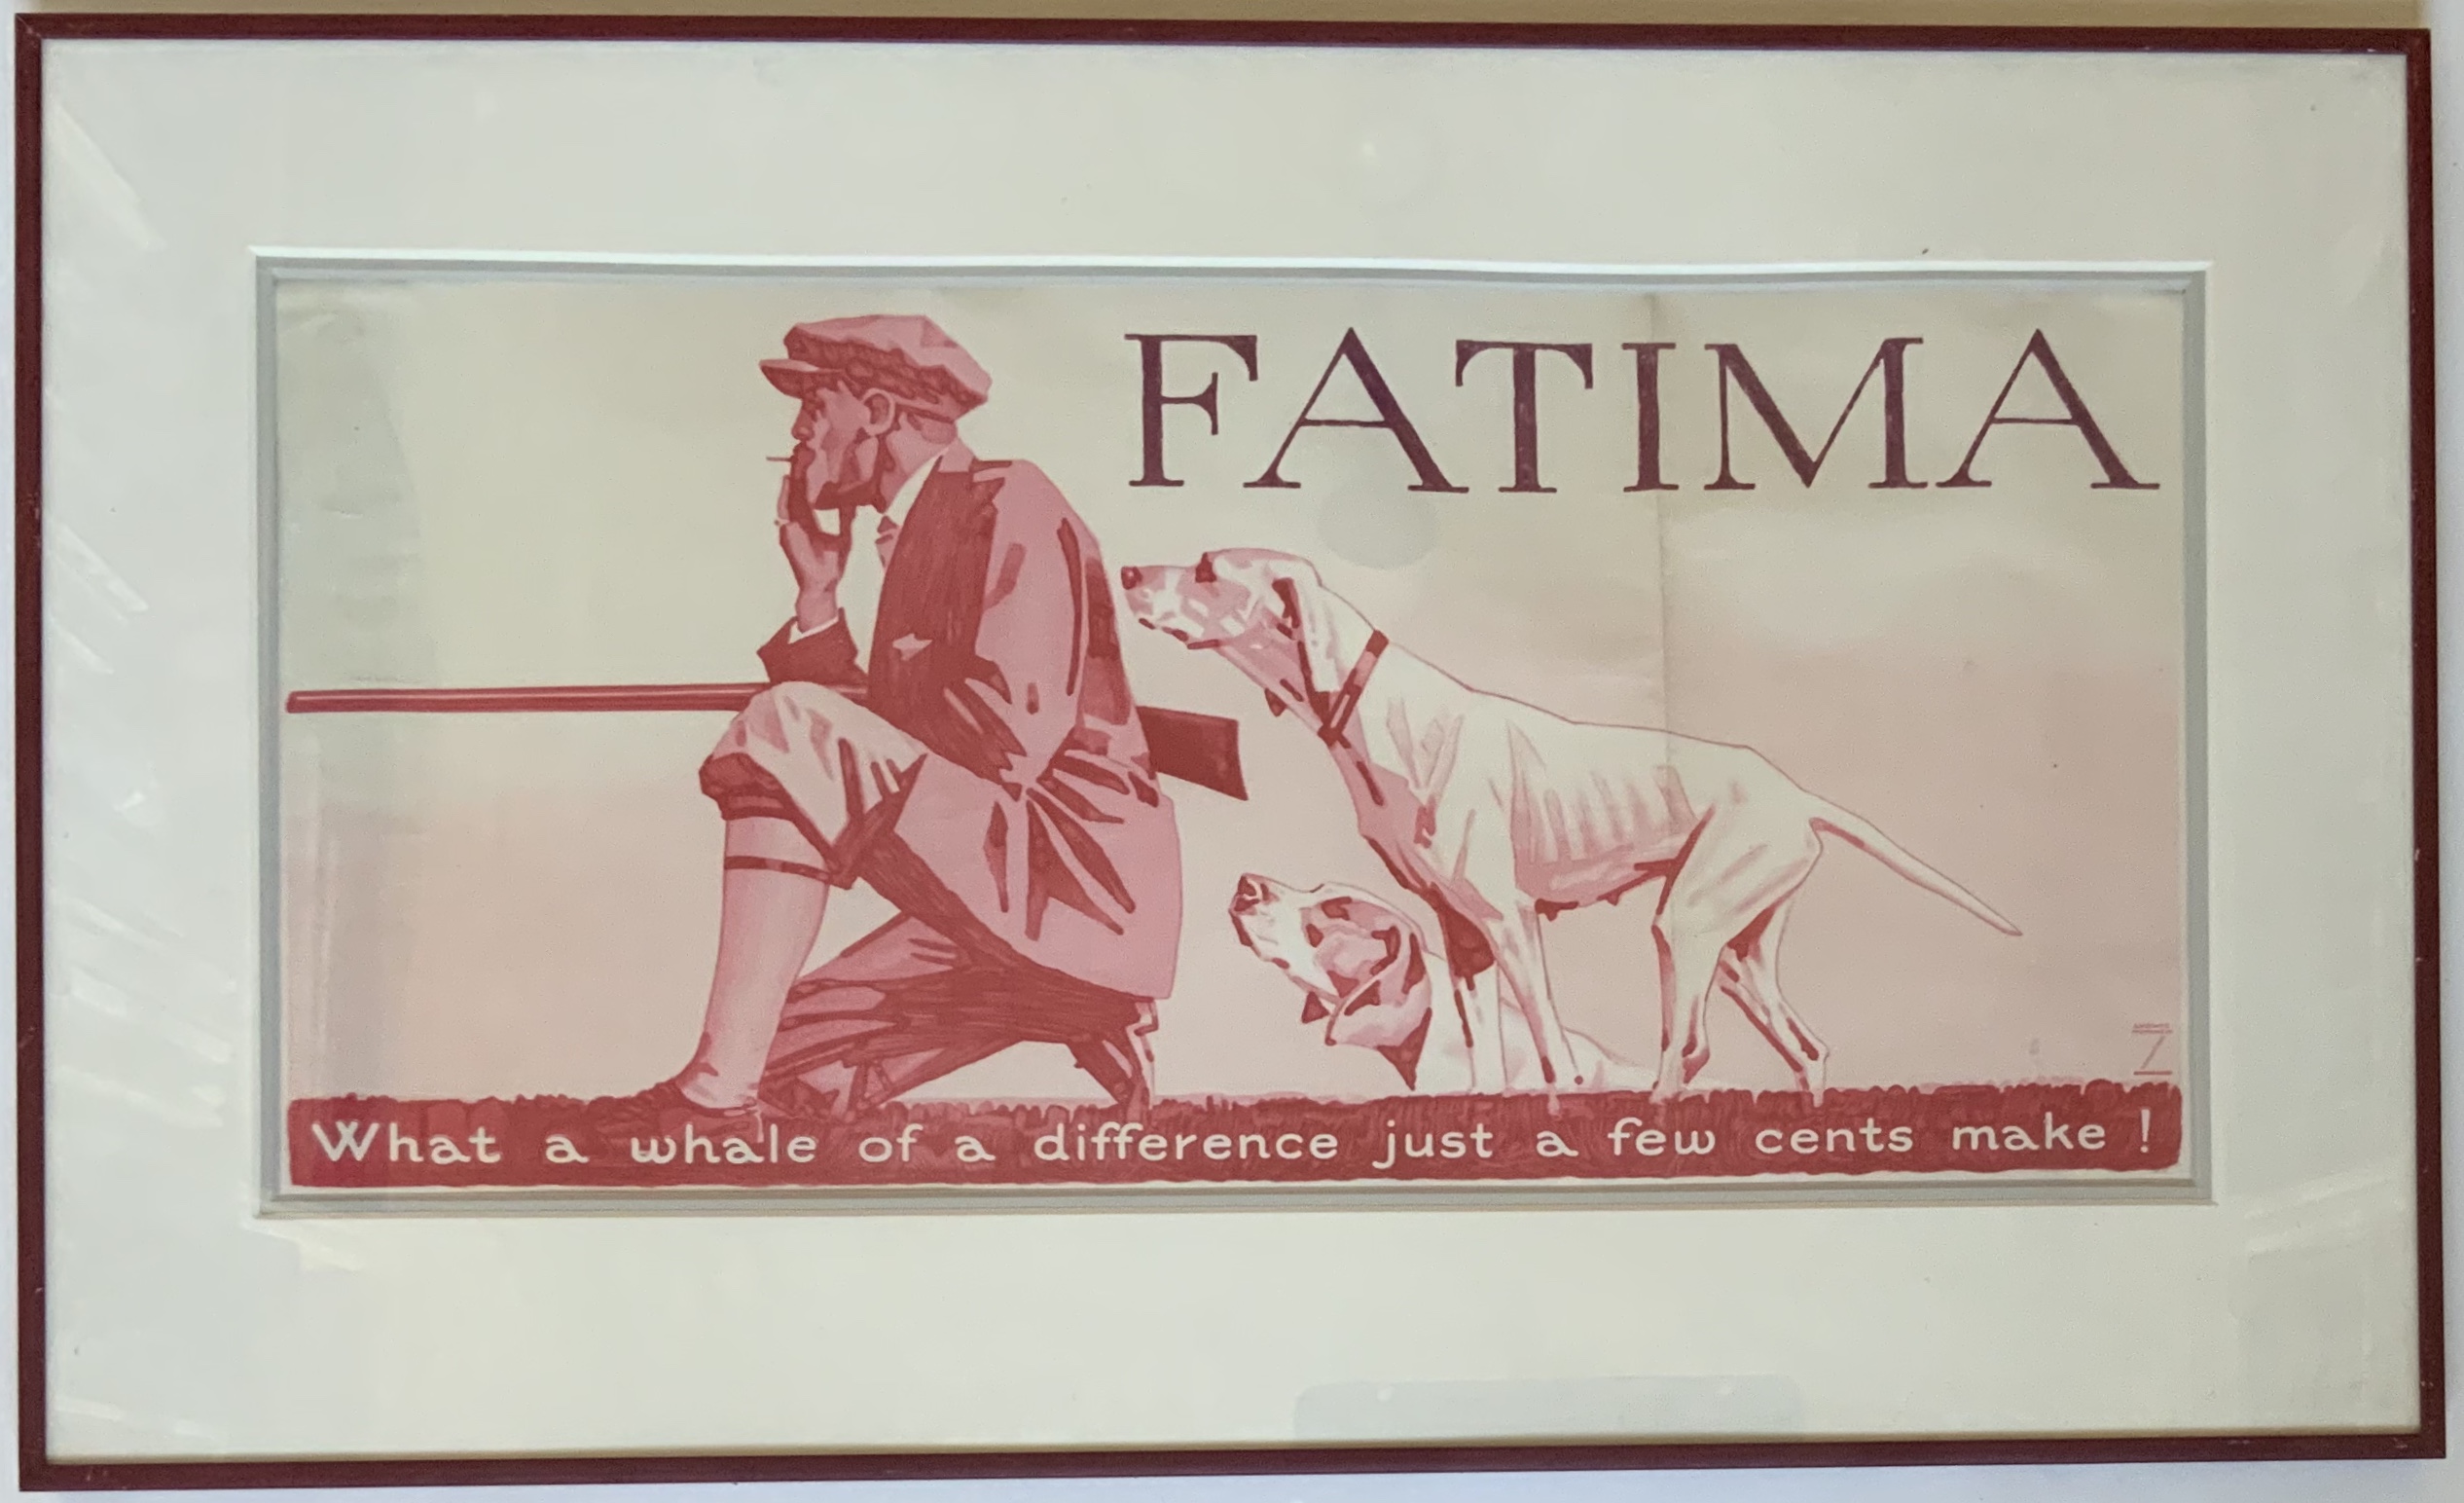 J858	FATIMA - WHAT A WHALE OF A DIFFERENCE JUST A FEW CENTS MAKE!